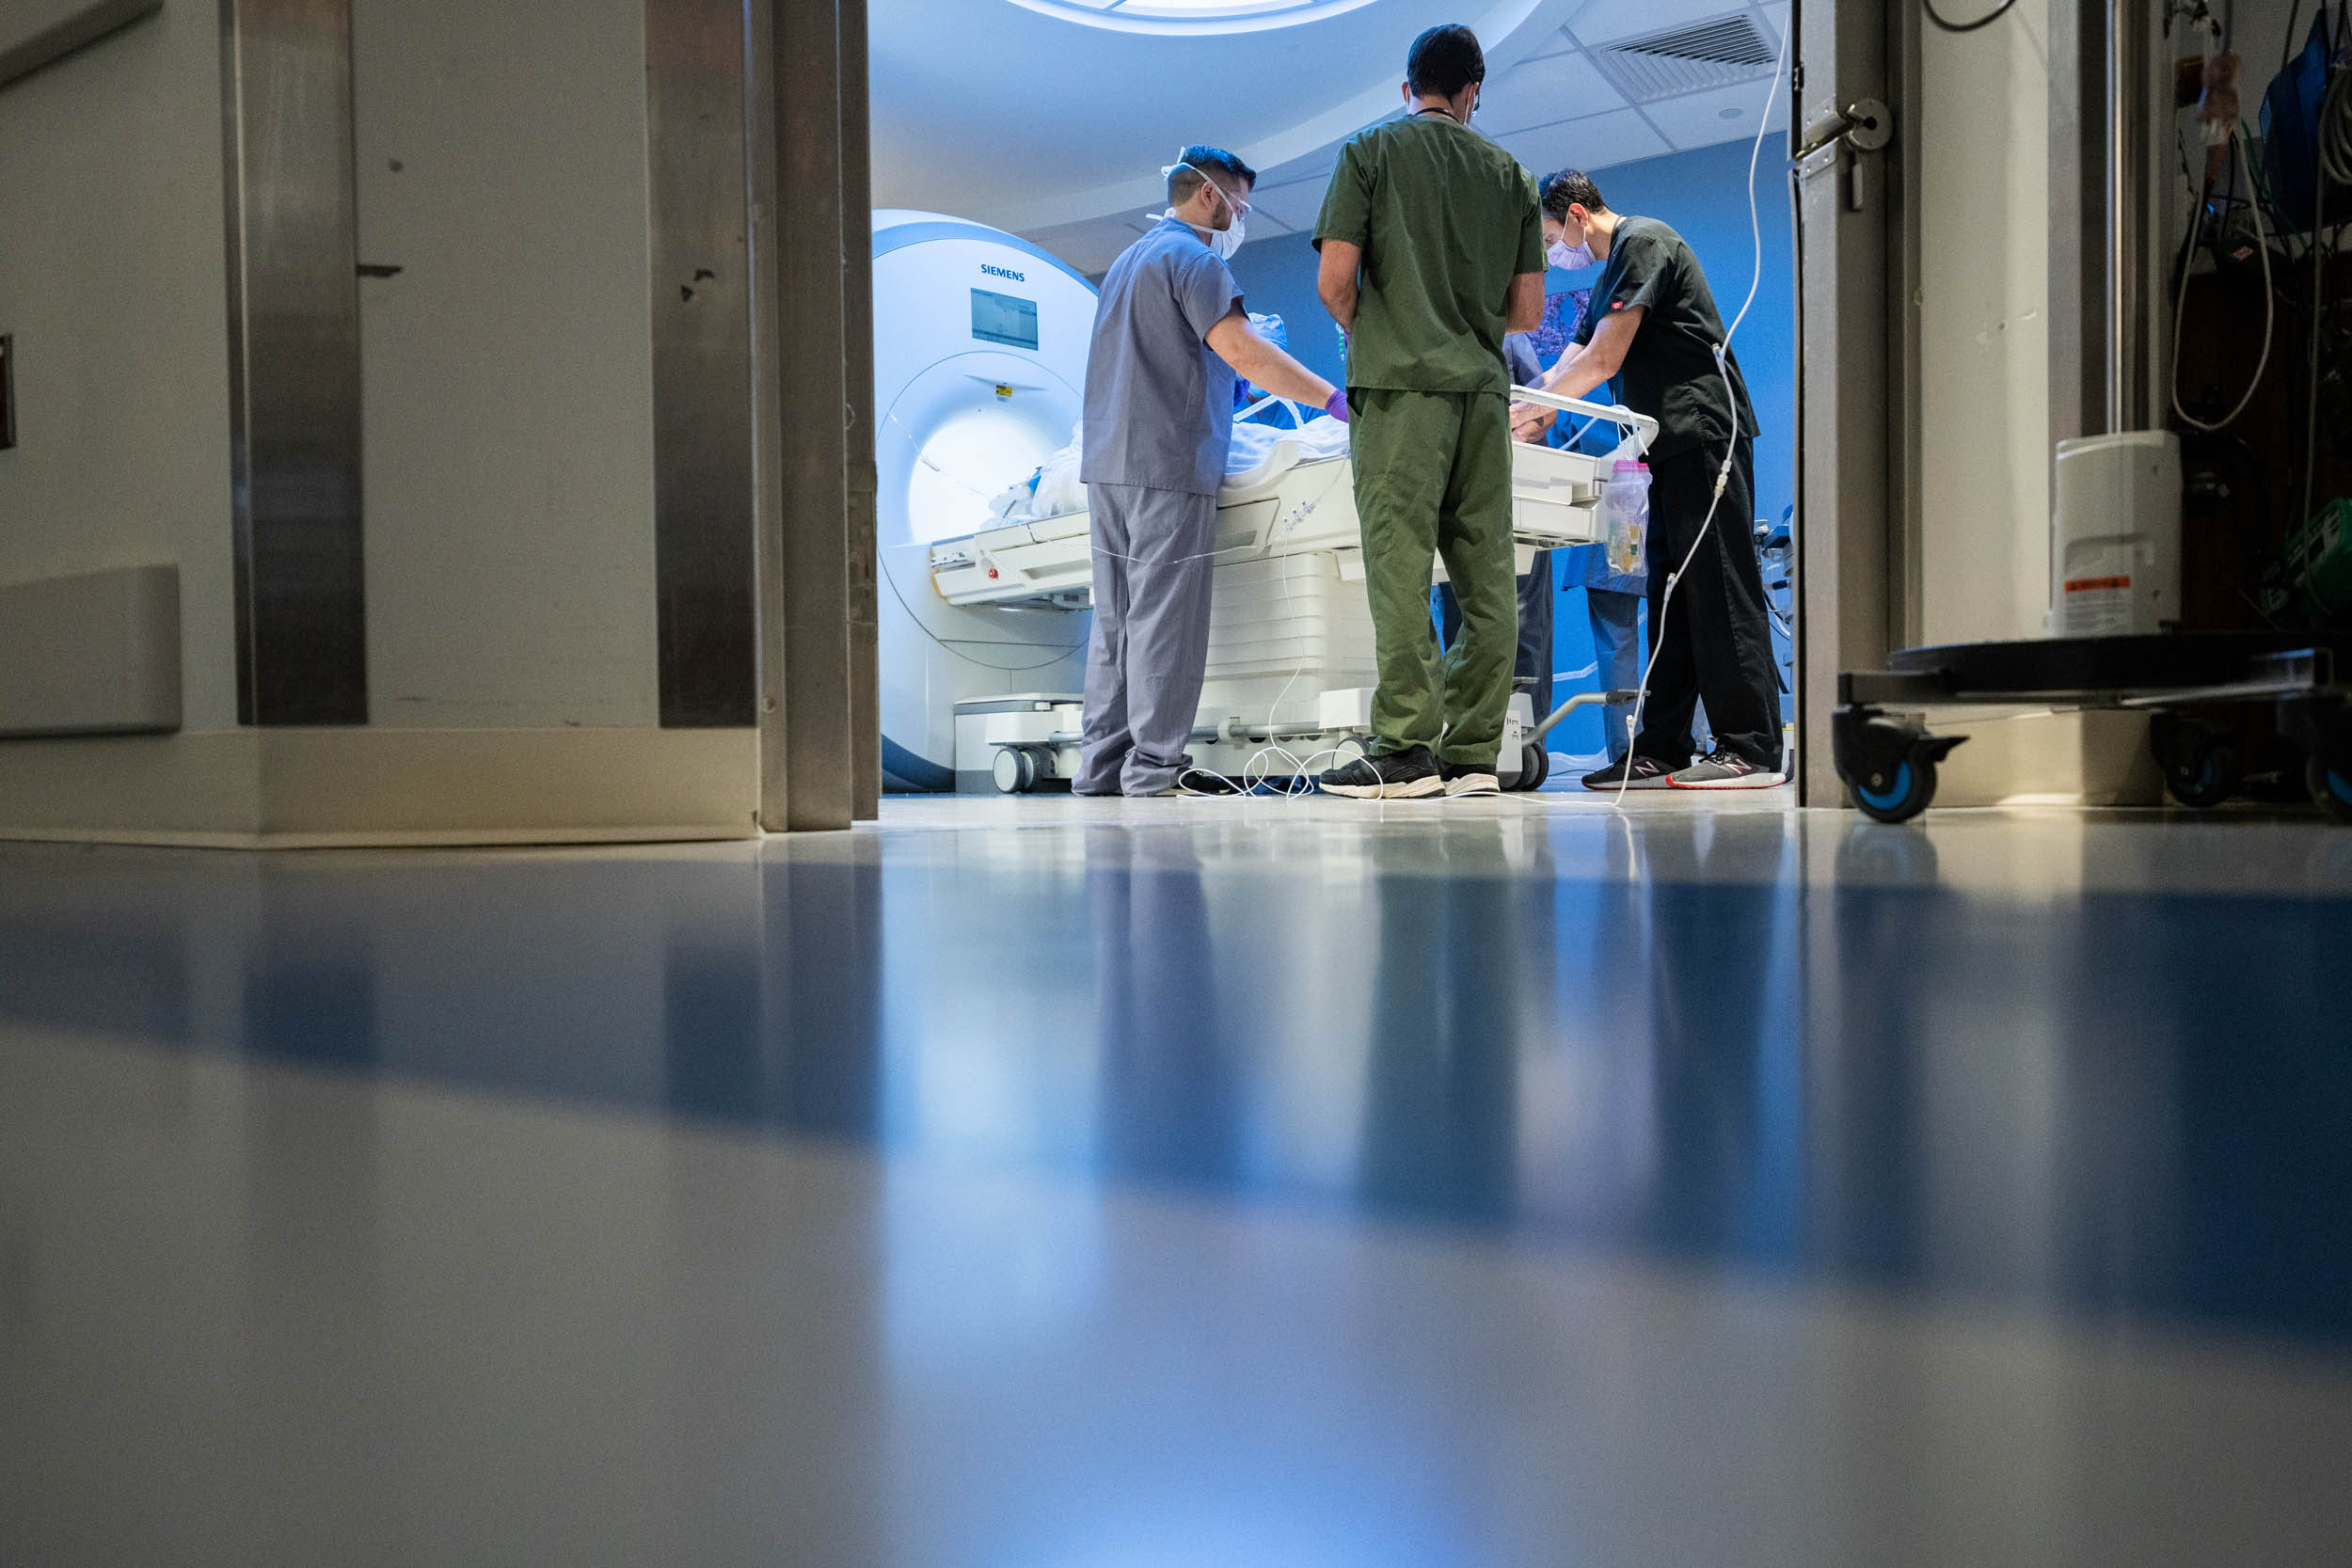 Healthcare workers preparing a patient for an mri